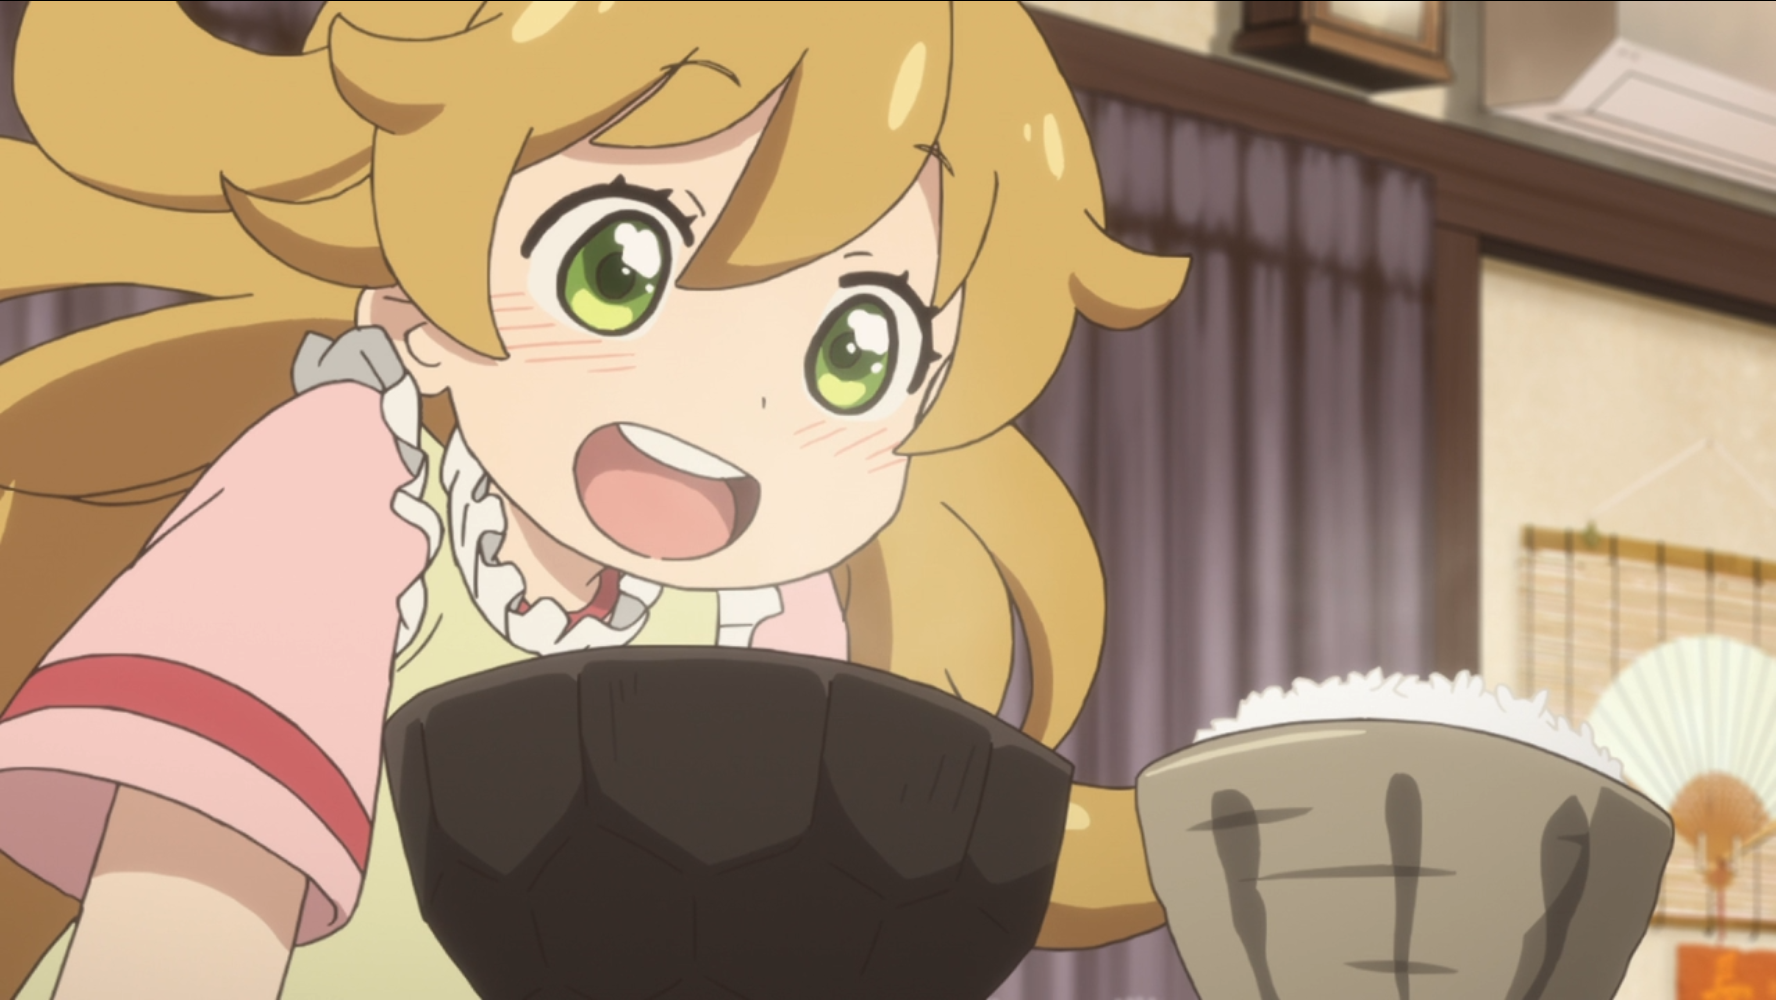 Tsumugi is pleased with a simple, home-cooked meal of soup and rice in a scene from the 2016 sweetness & lightning TV anime.